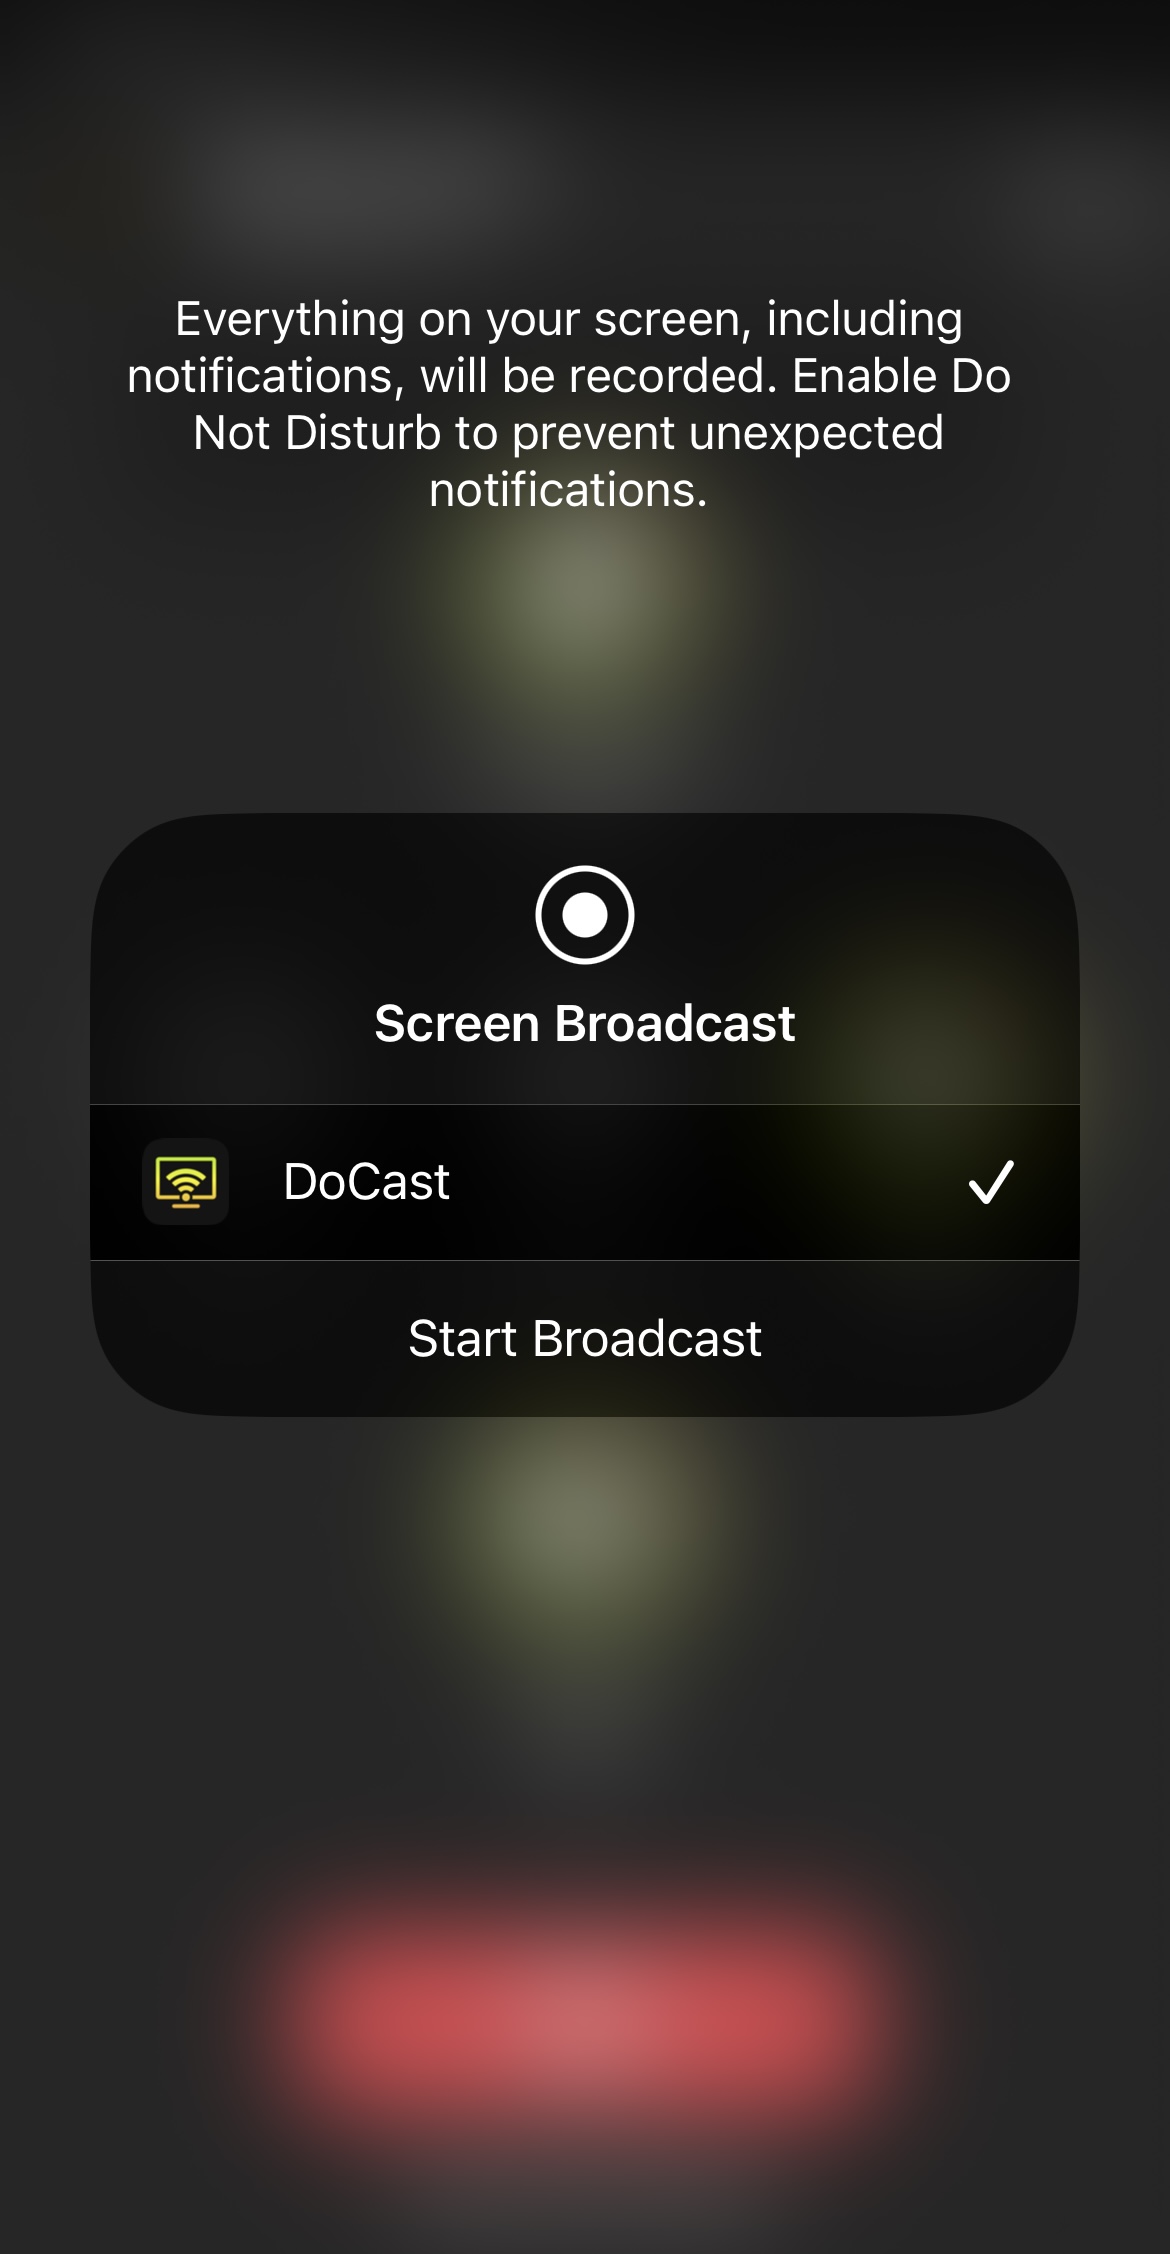 Tap on the Start Broadcast button on DoCast